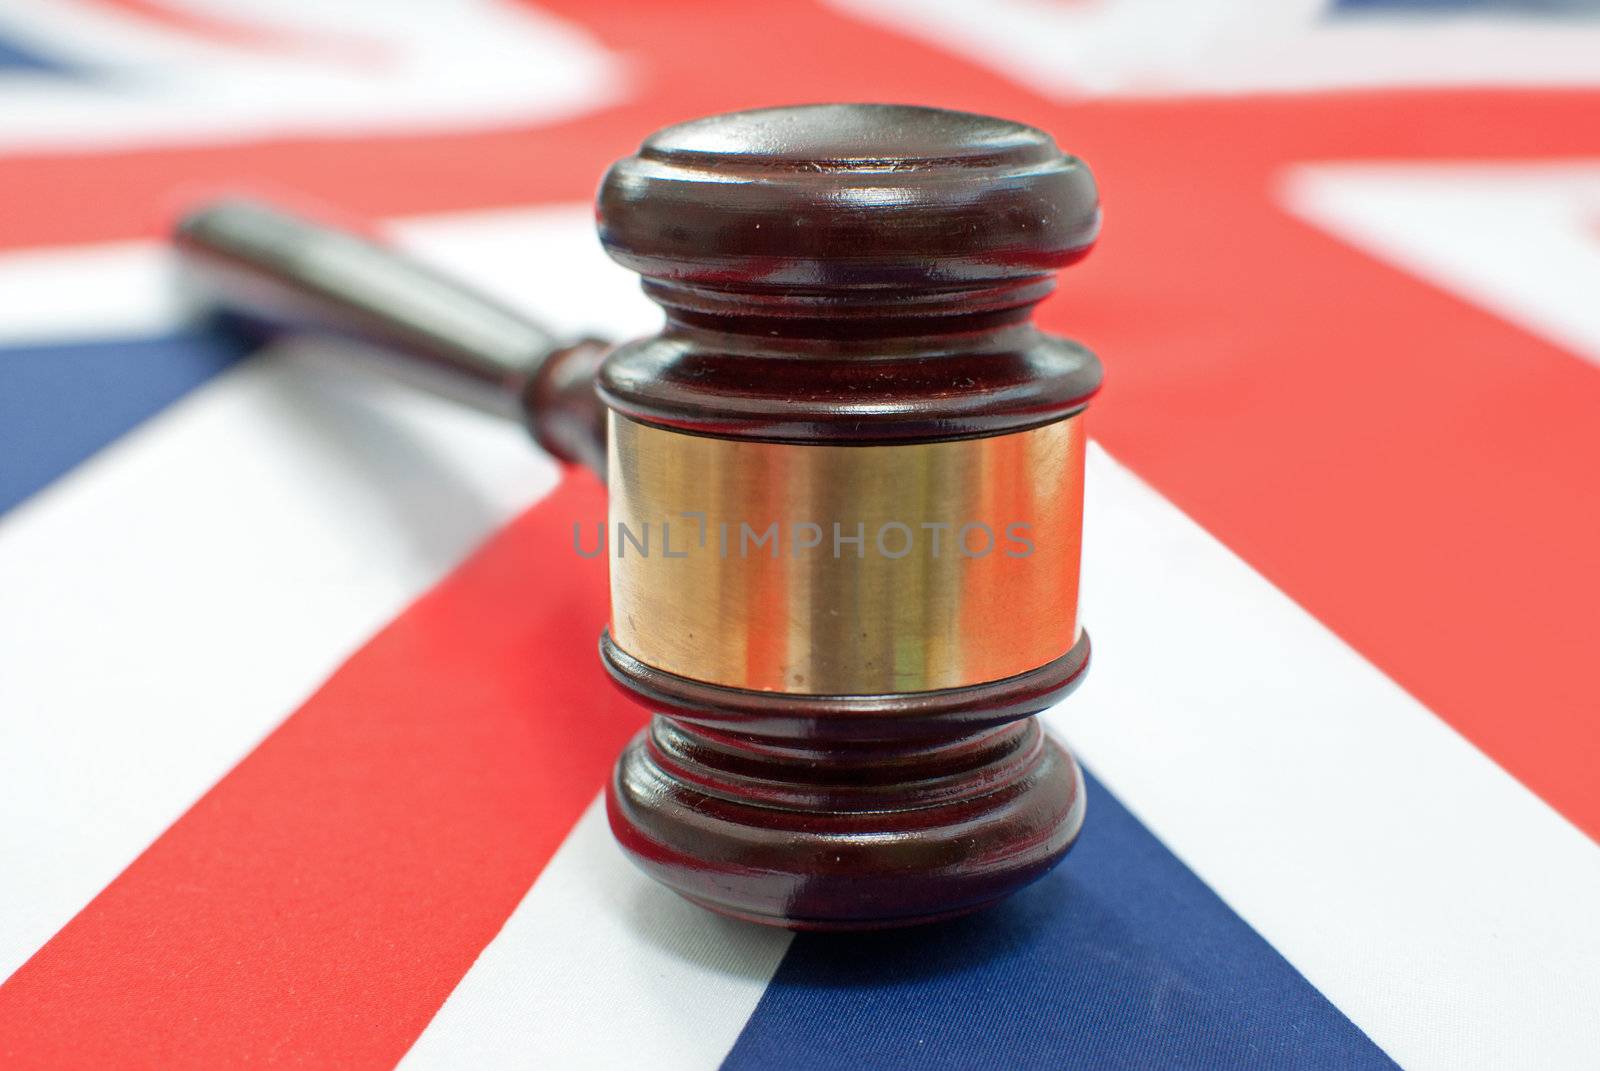 Gavel on top of a British flag